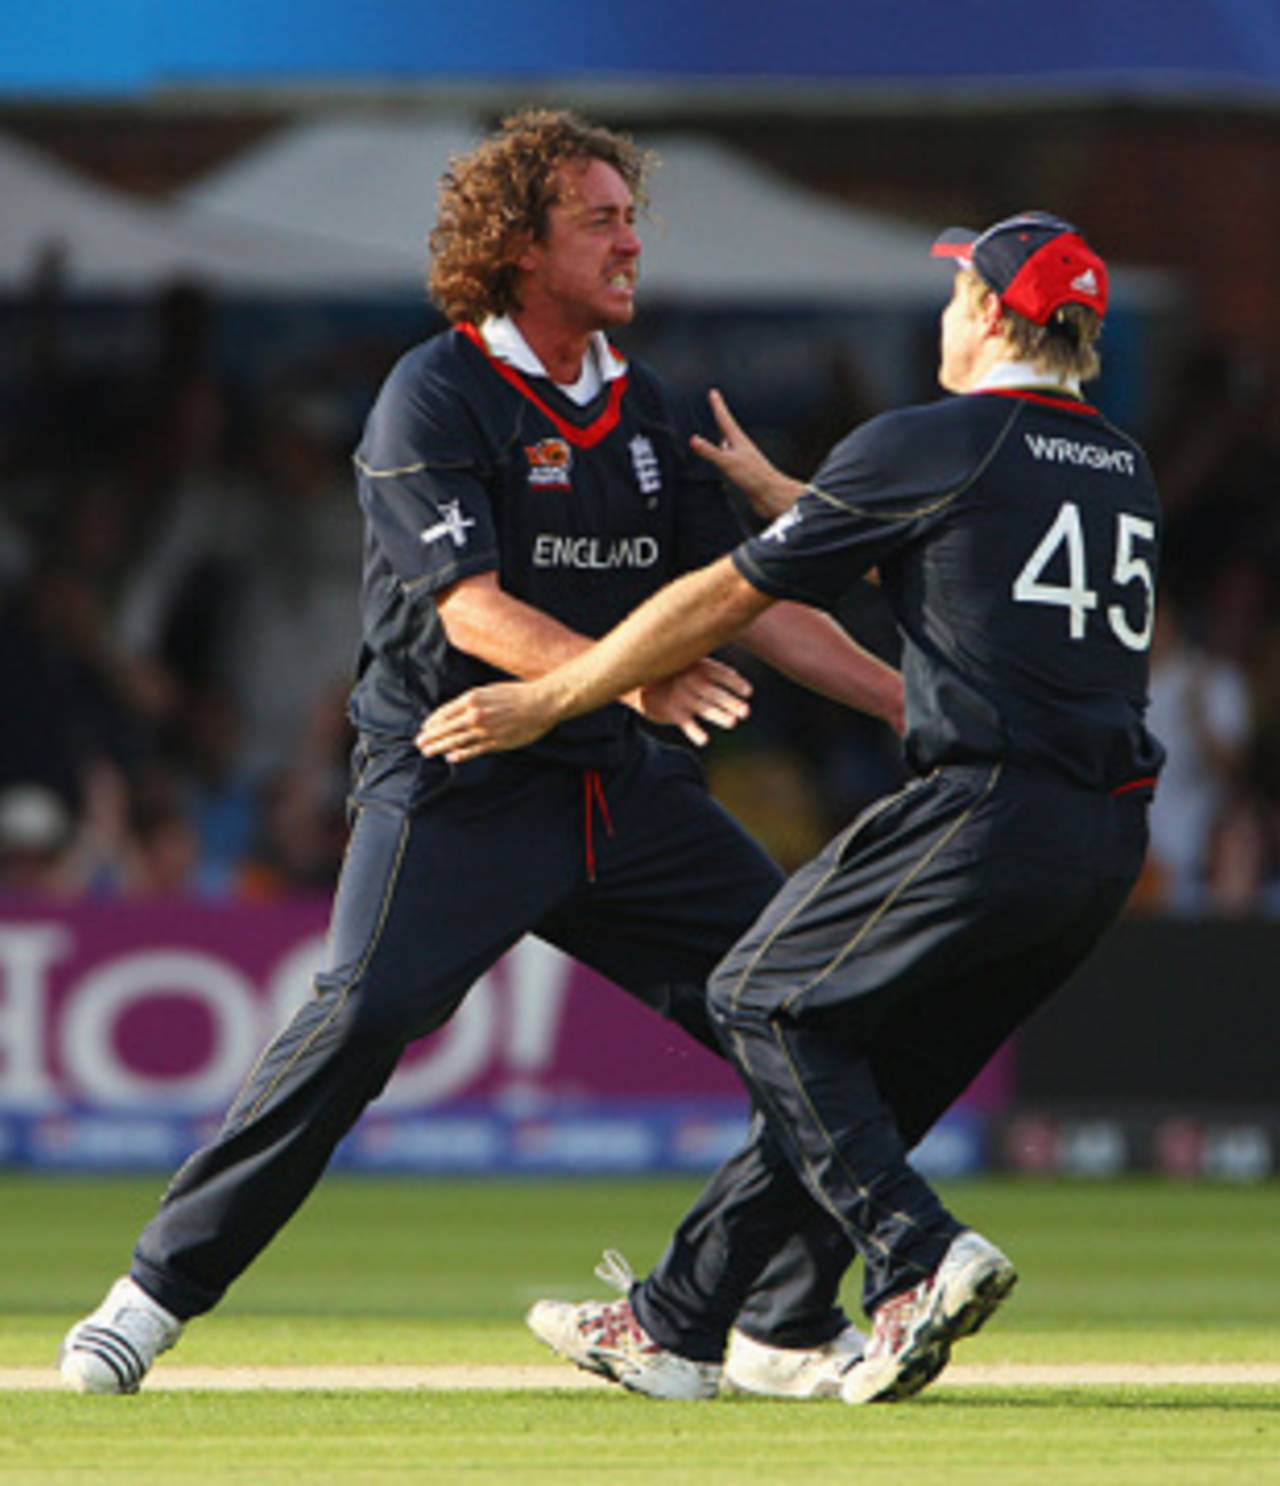 Ryan Sidebottom celebrates an early Indian wicket with traditional roar, England v India, ICC World Twenty20 Super Eights, Lord's, June 14, 2009